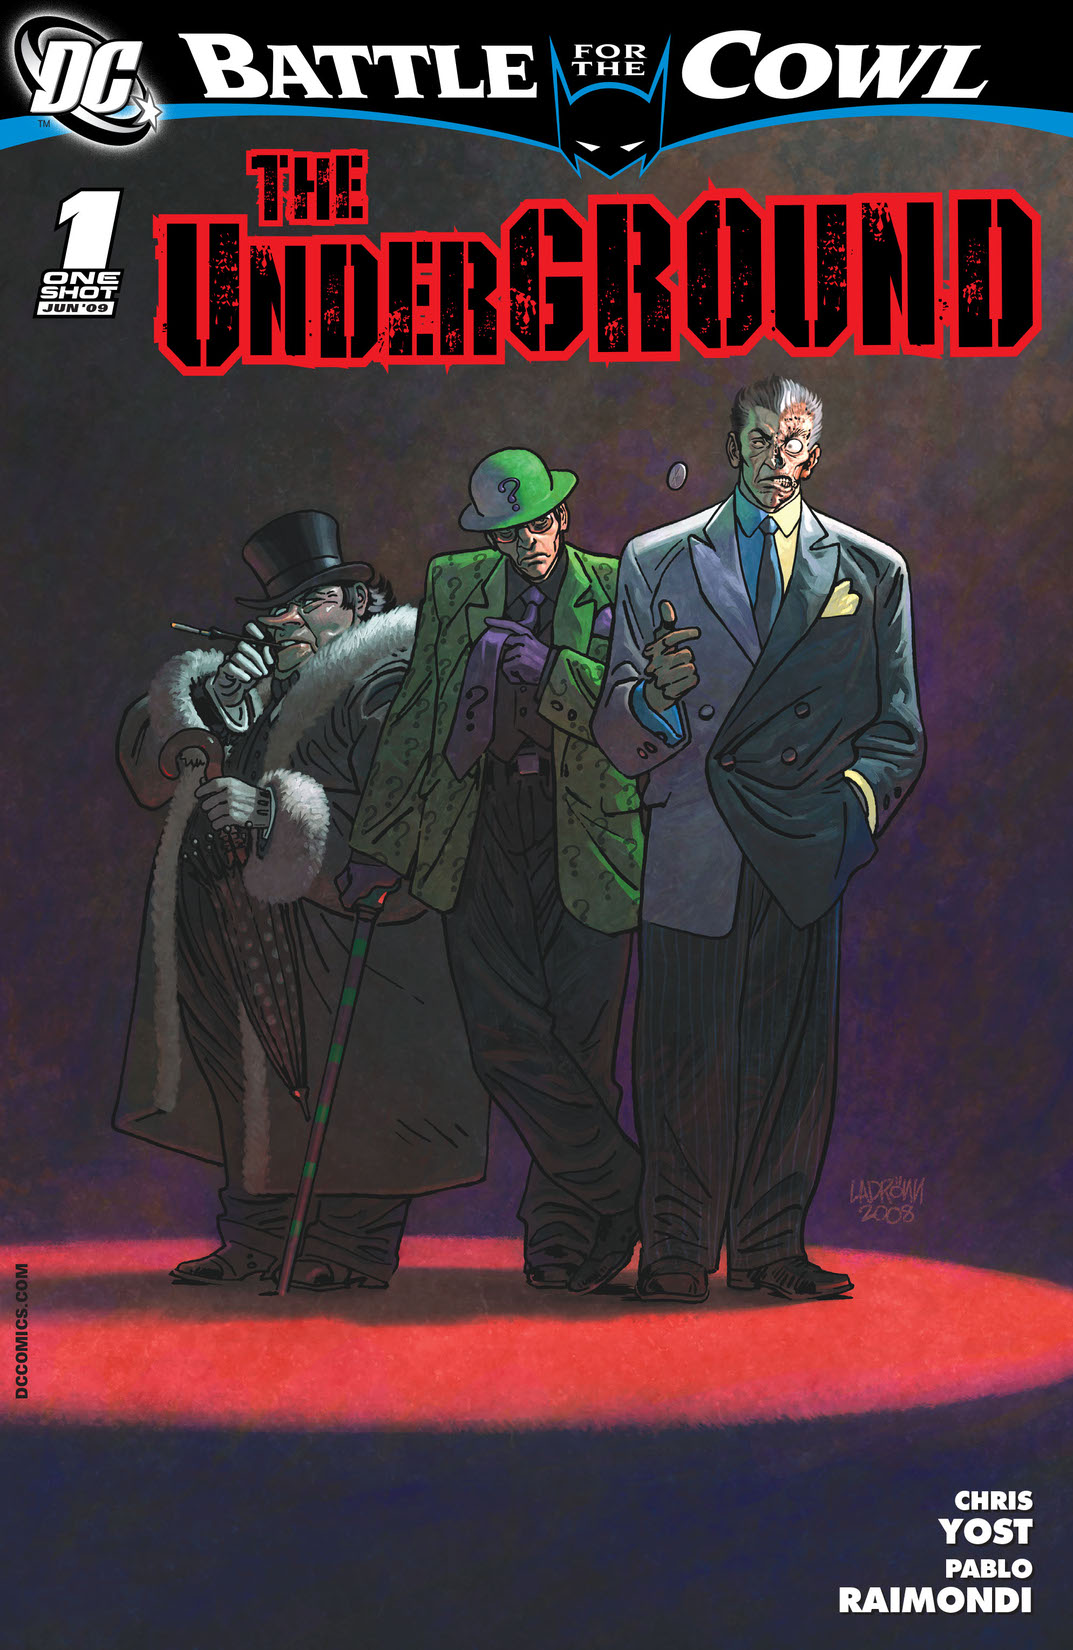 Batman: Battle for the Cowl: The Underground #1 preview images